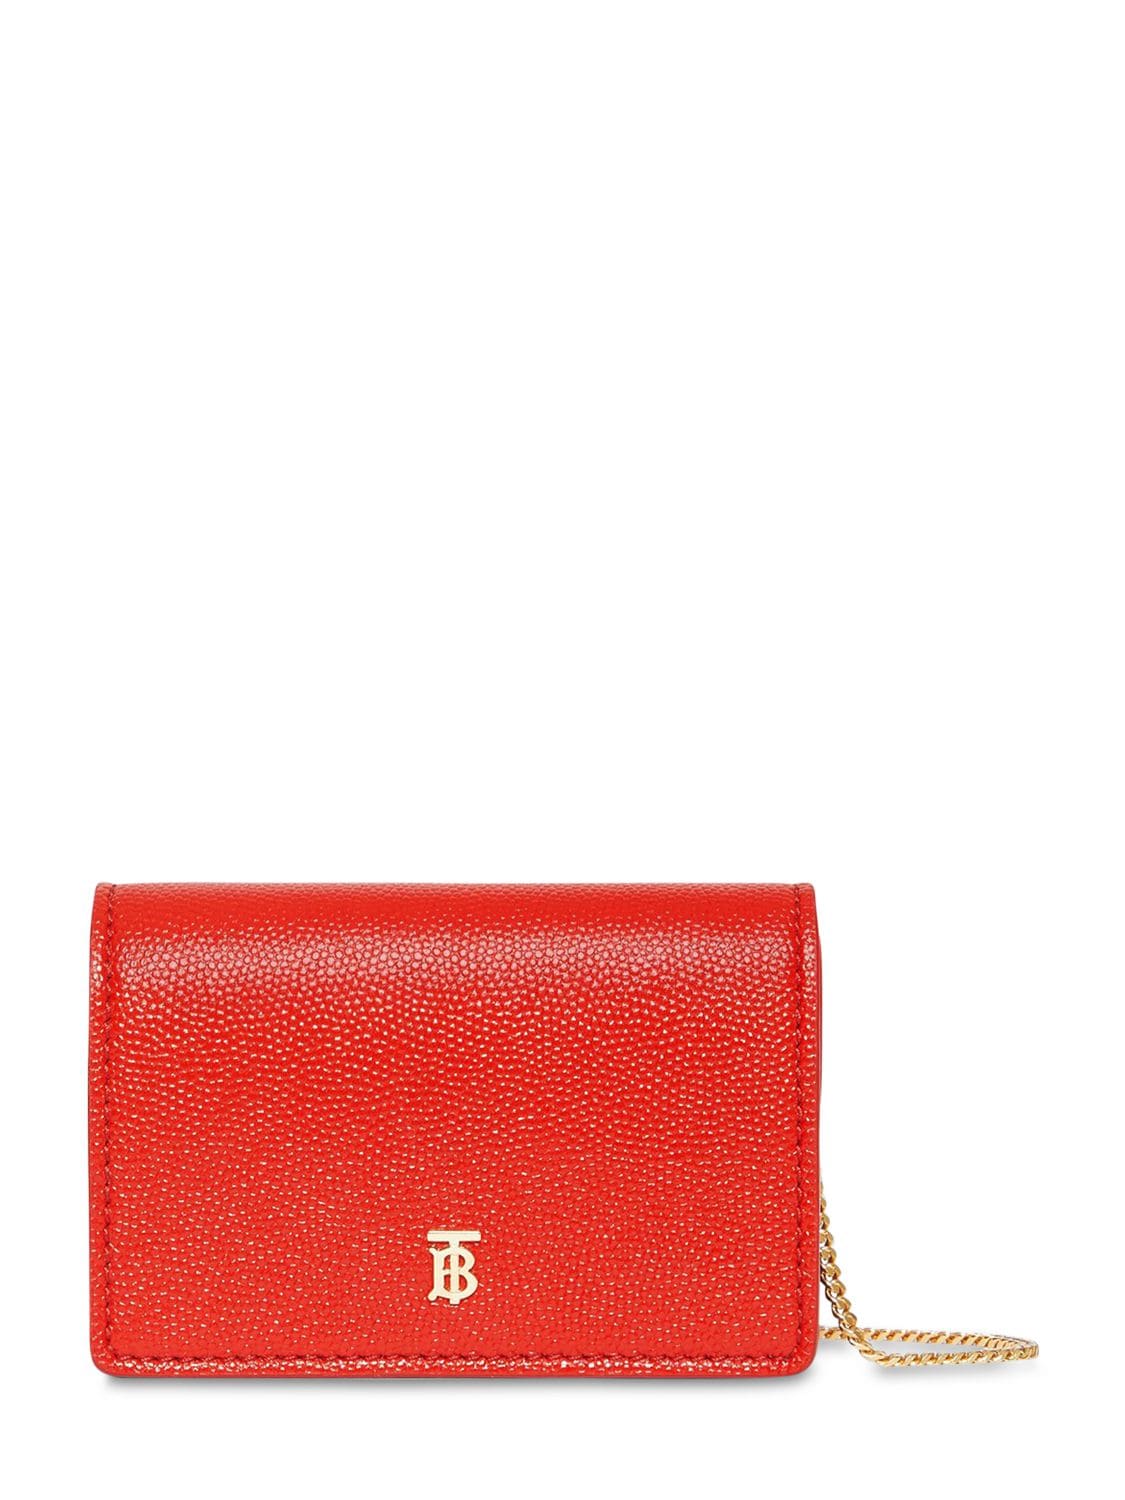 Burberry Jessie Grained Leather Chain Wallet In Bright Red